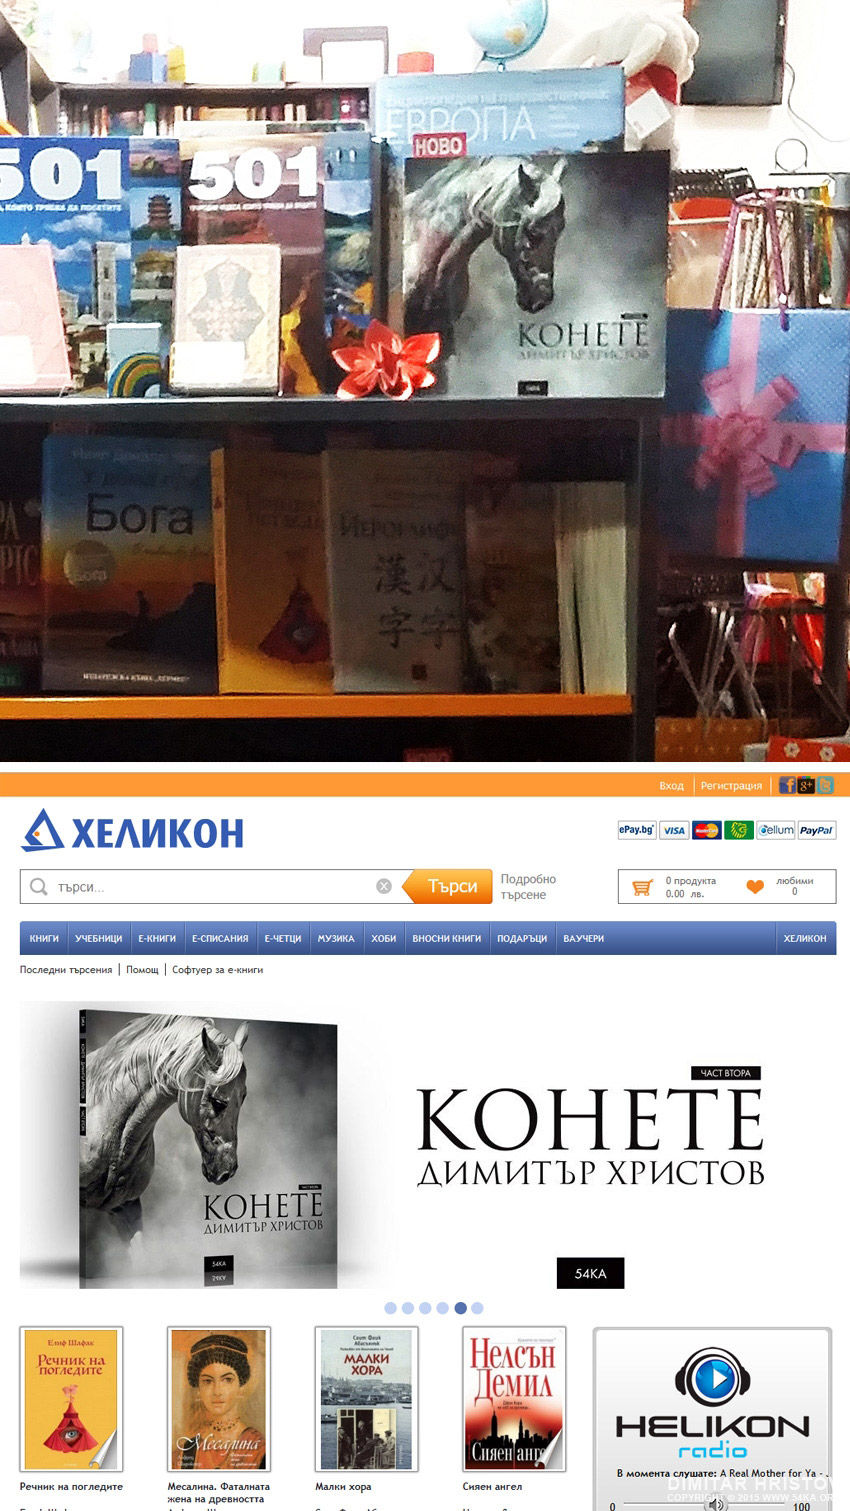 The Horses II by Dimitar Hristov   Featured book of the month   Helikon bookstore 54ka news  Photo